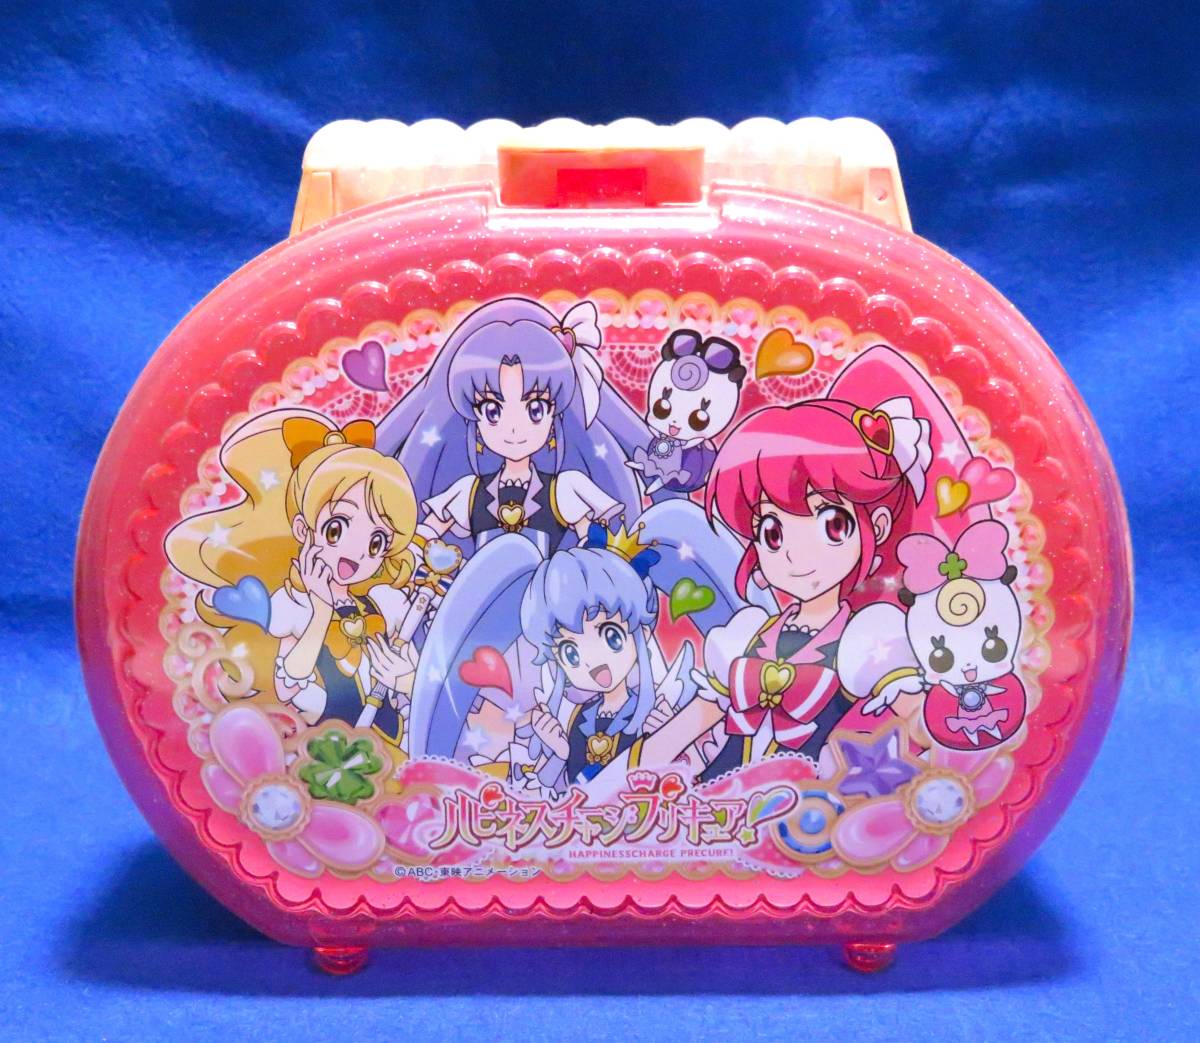  scratch, dirt have is pines Charge Precure! plastic confection case / HAPPINESSCHARGE PRECURE!